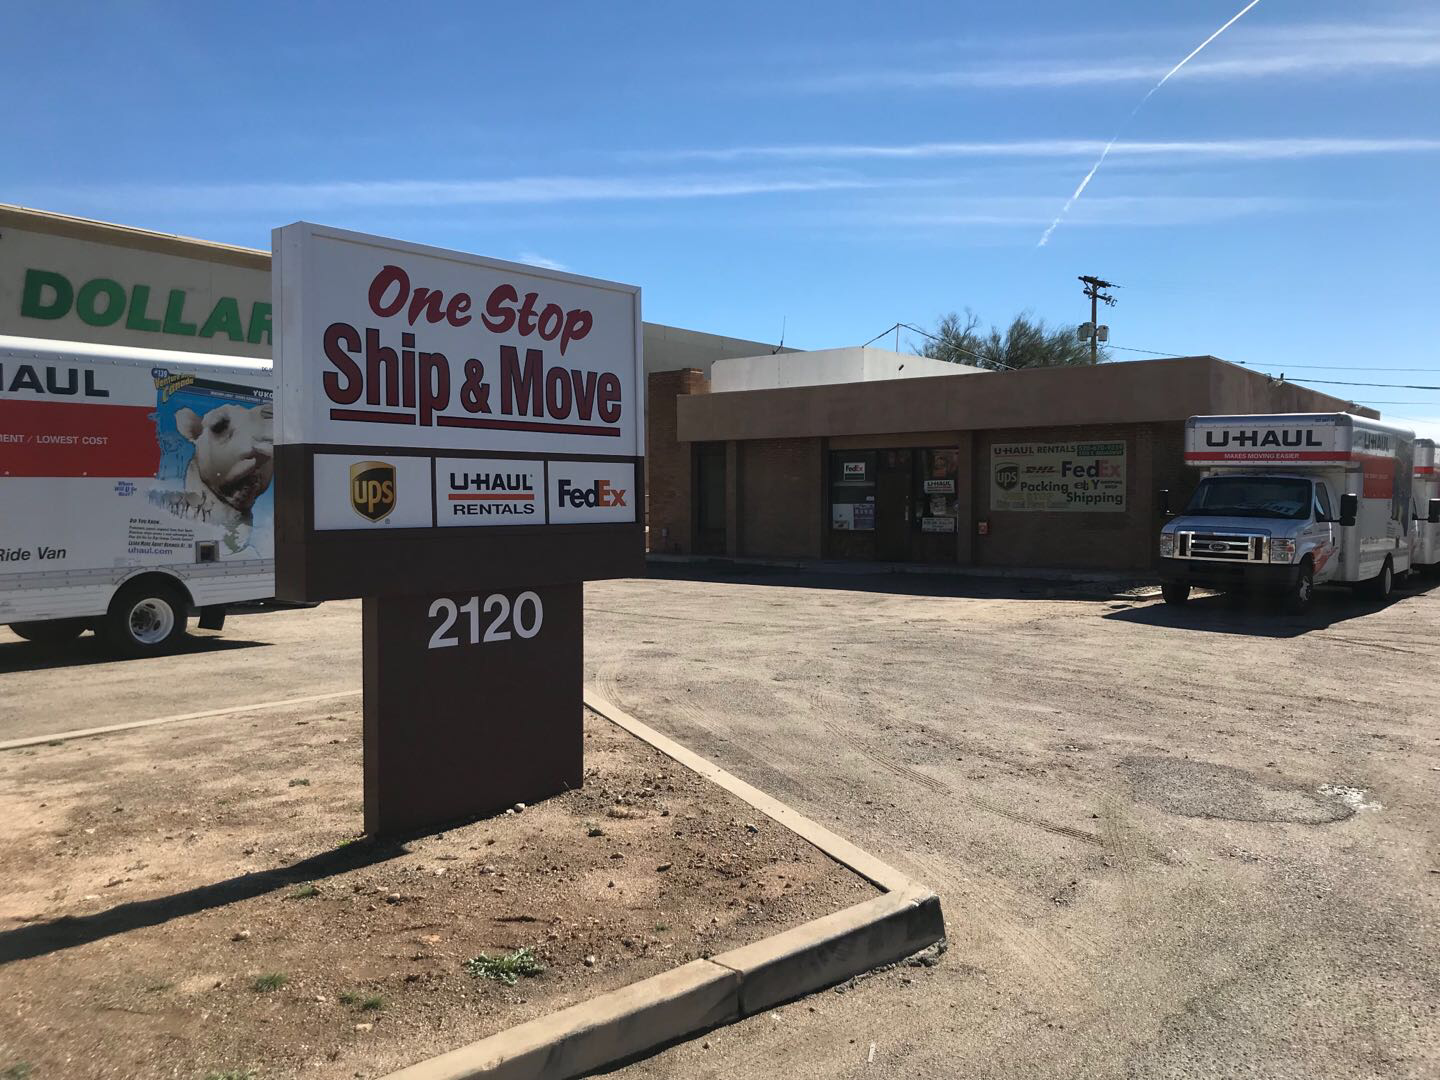 One Stop Ship & Move